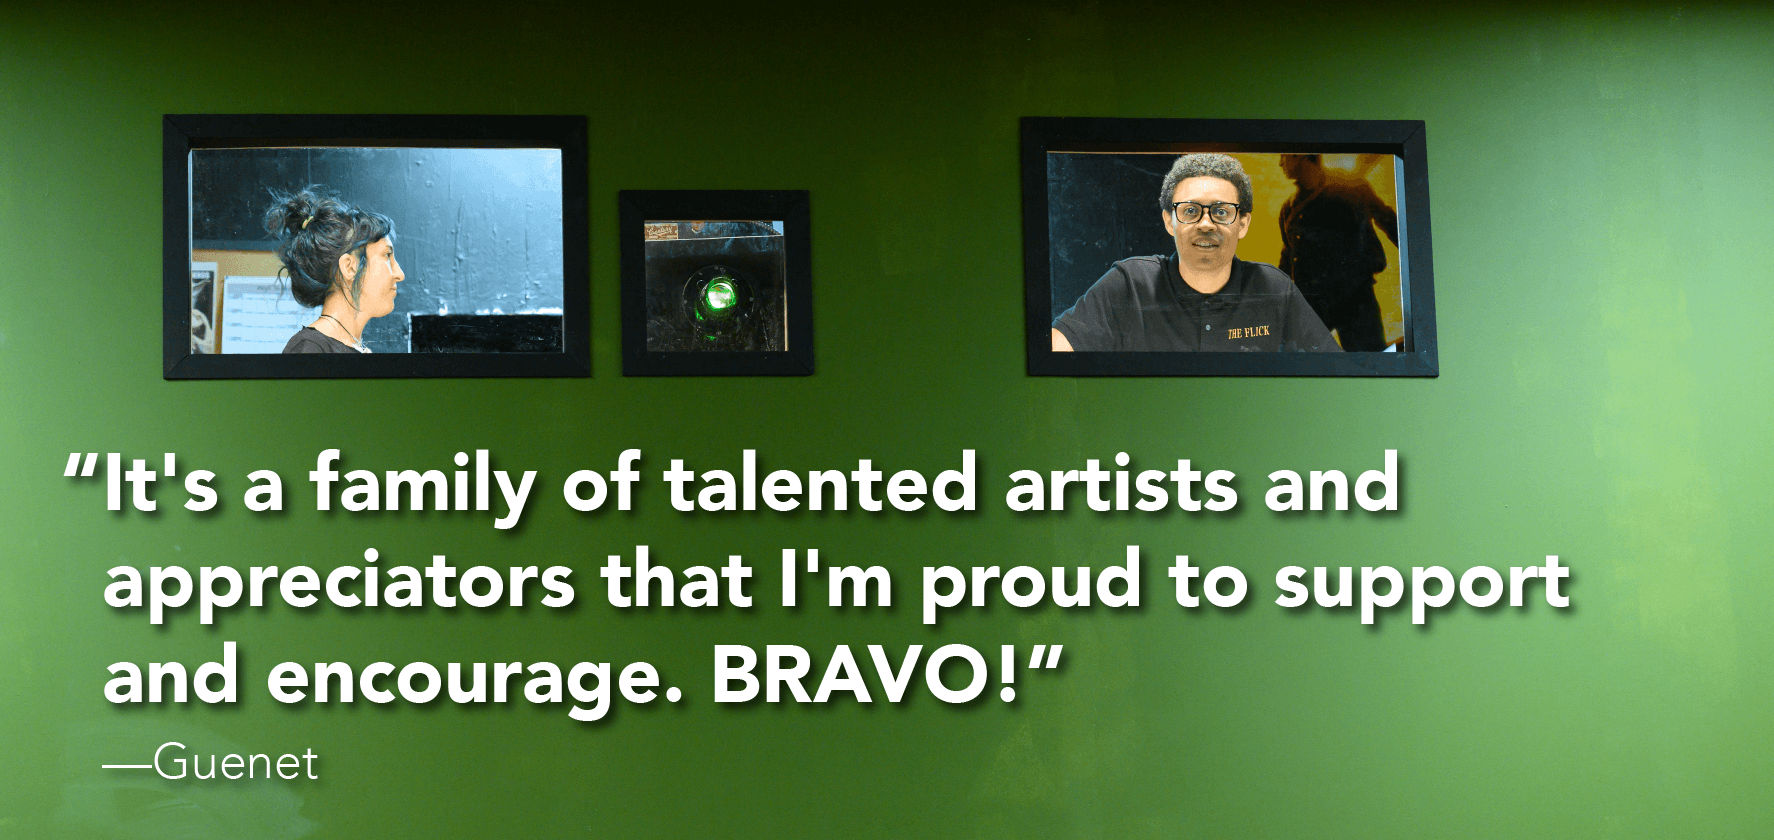 ‘It's a family of talented artists and appreciators that I'm proud to support and encourage. BRAVO!’  —Guenet